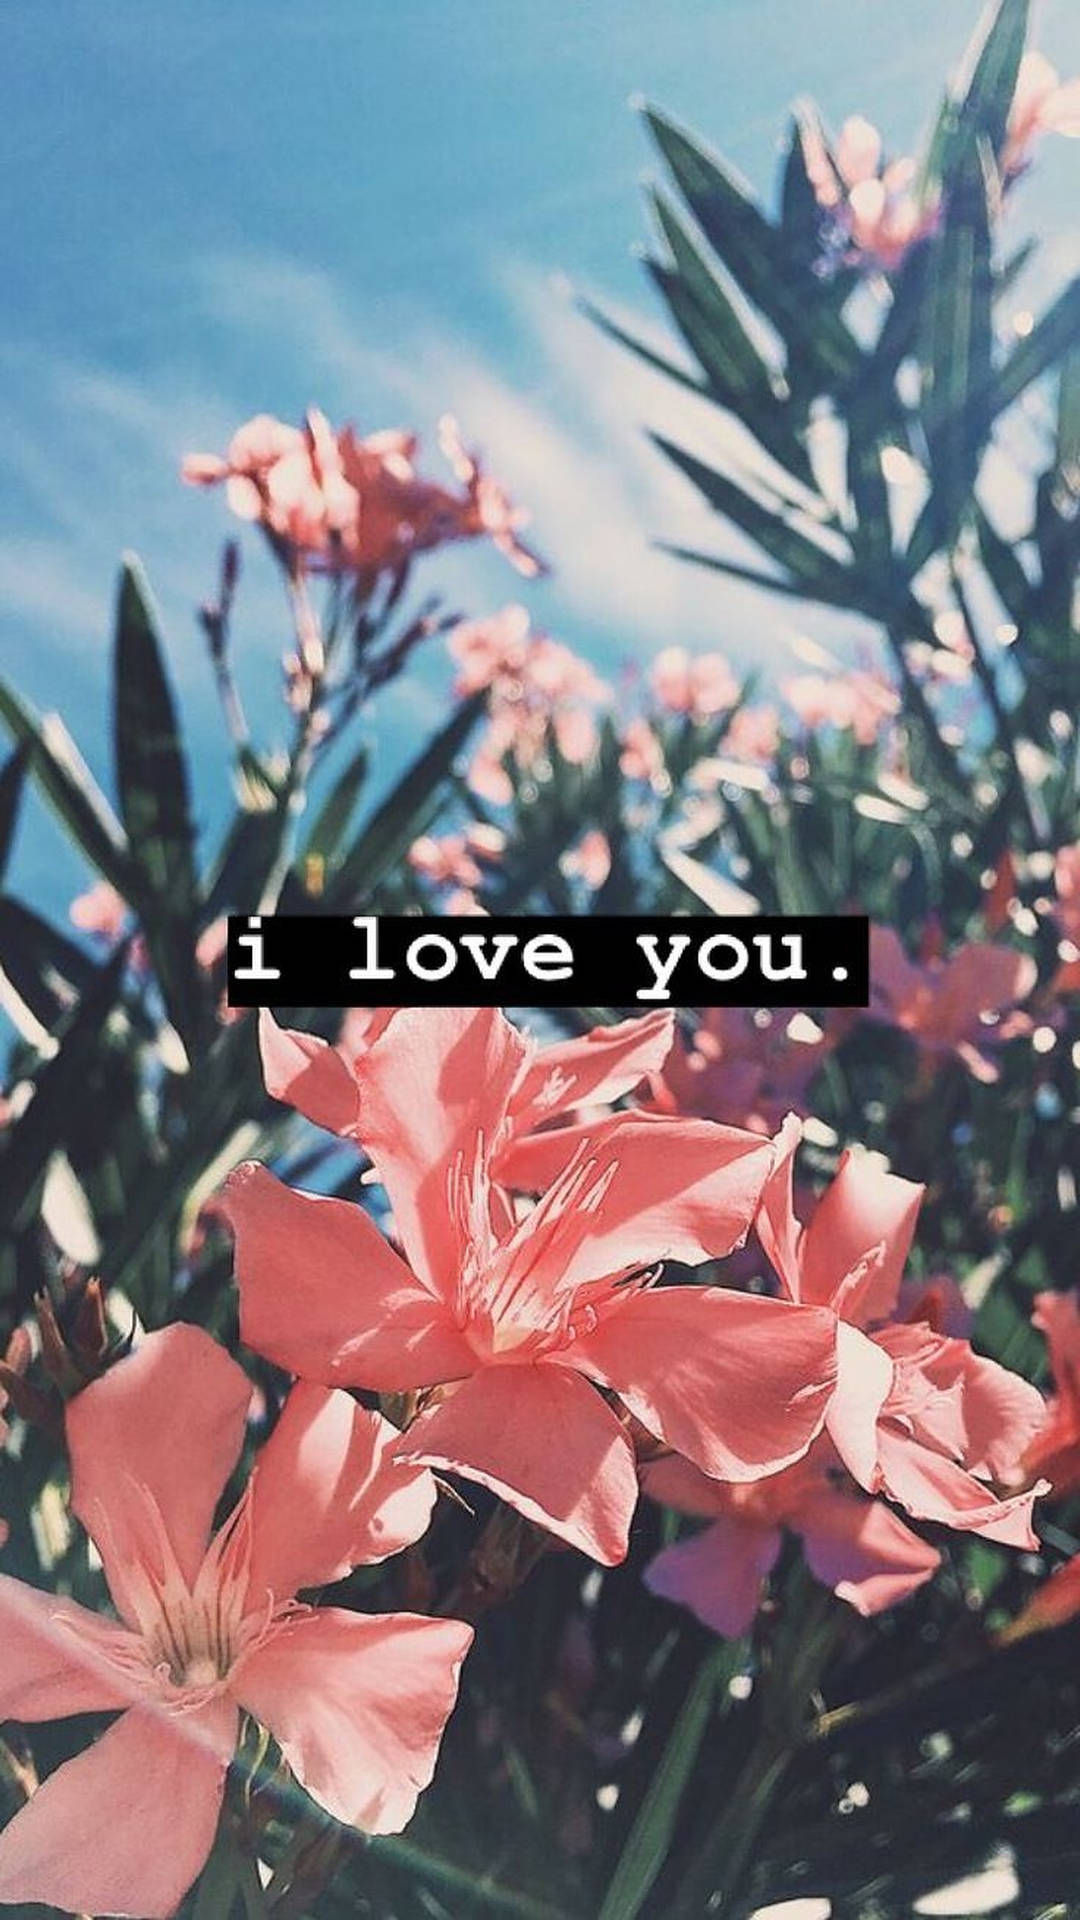 I Love You 1472X2618 Wallpaper and Background Image